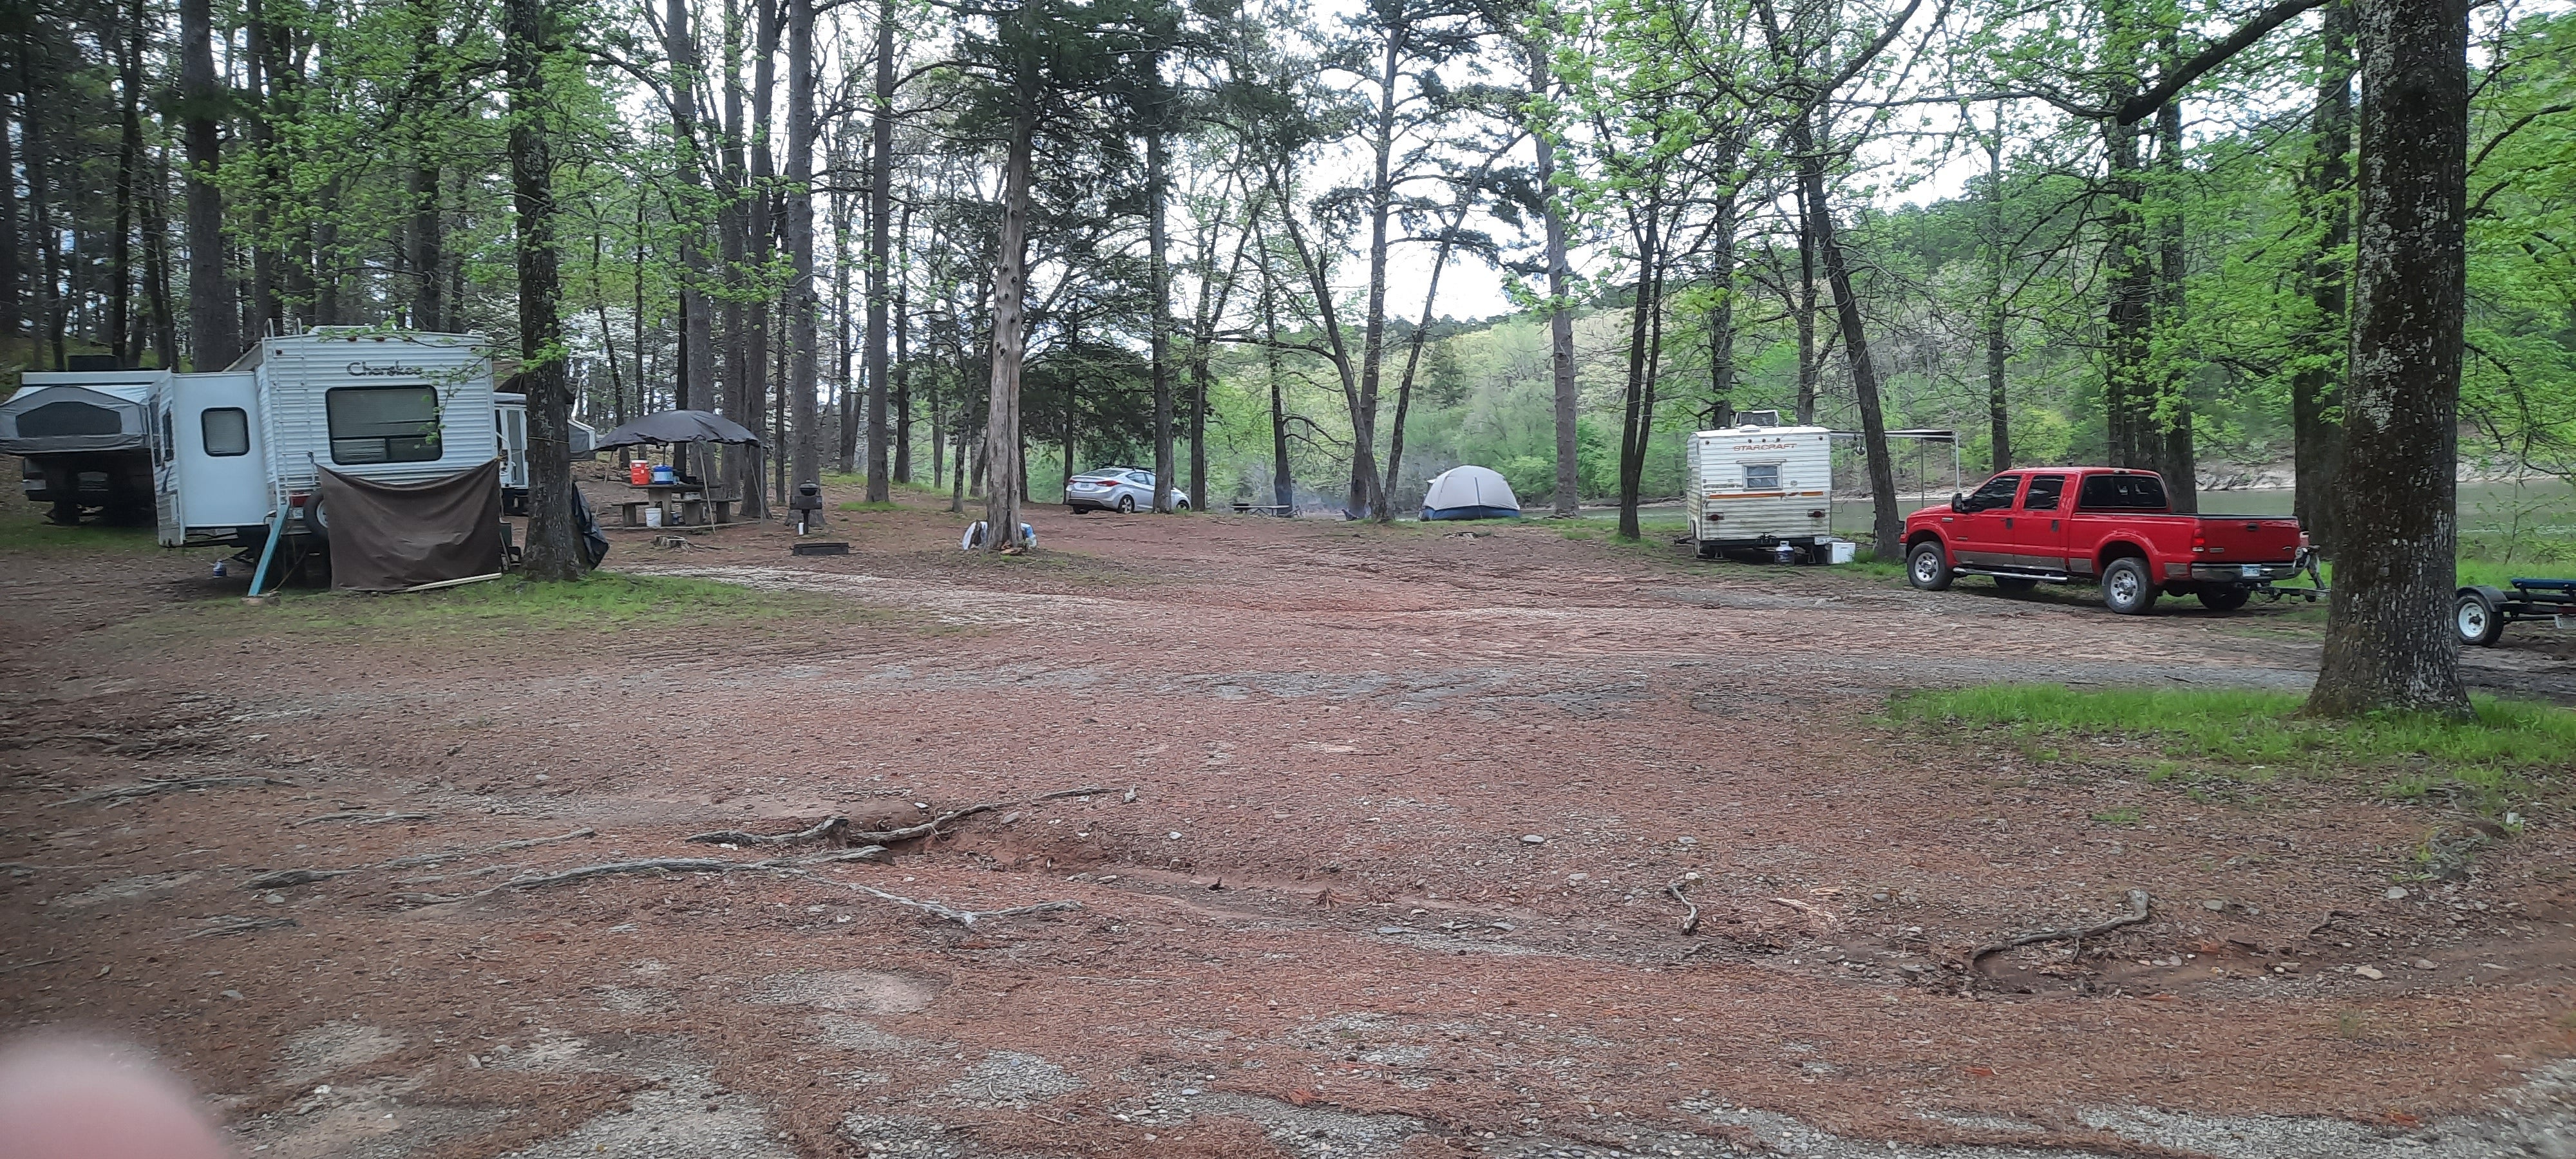 Camper submitted image from Irons Fork Primitive Camping - 3